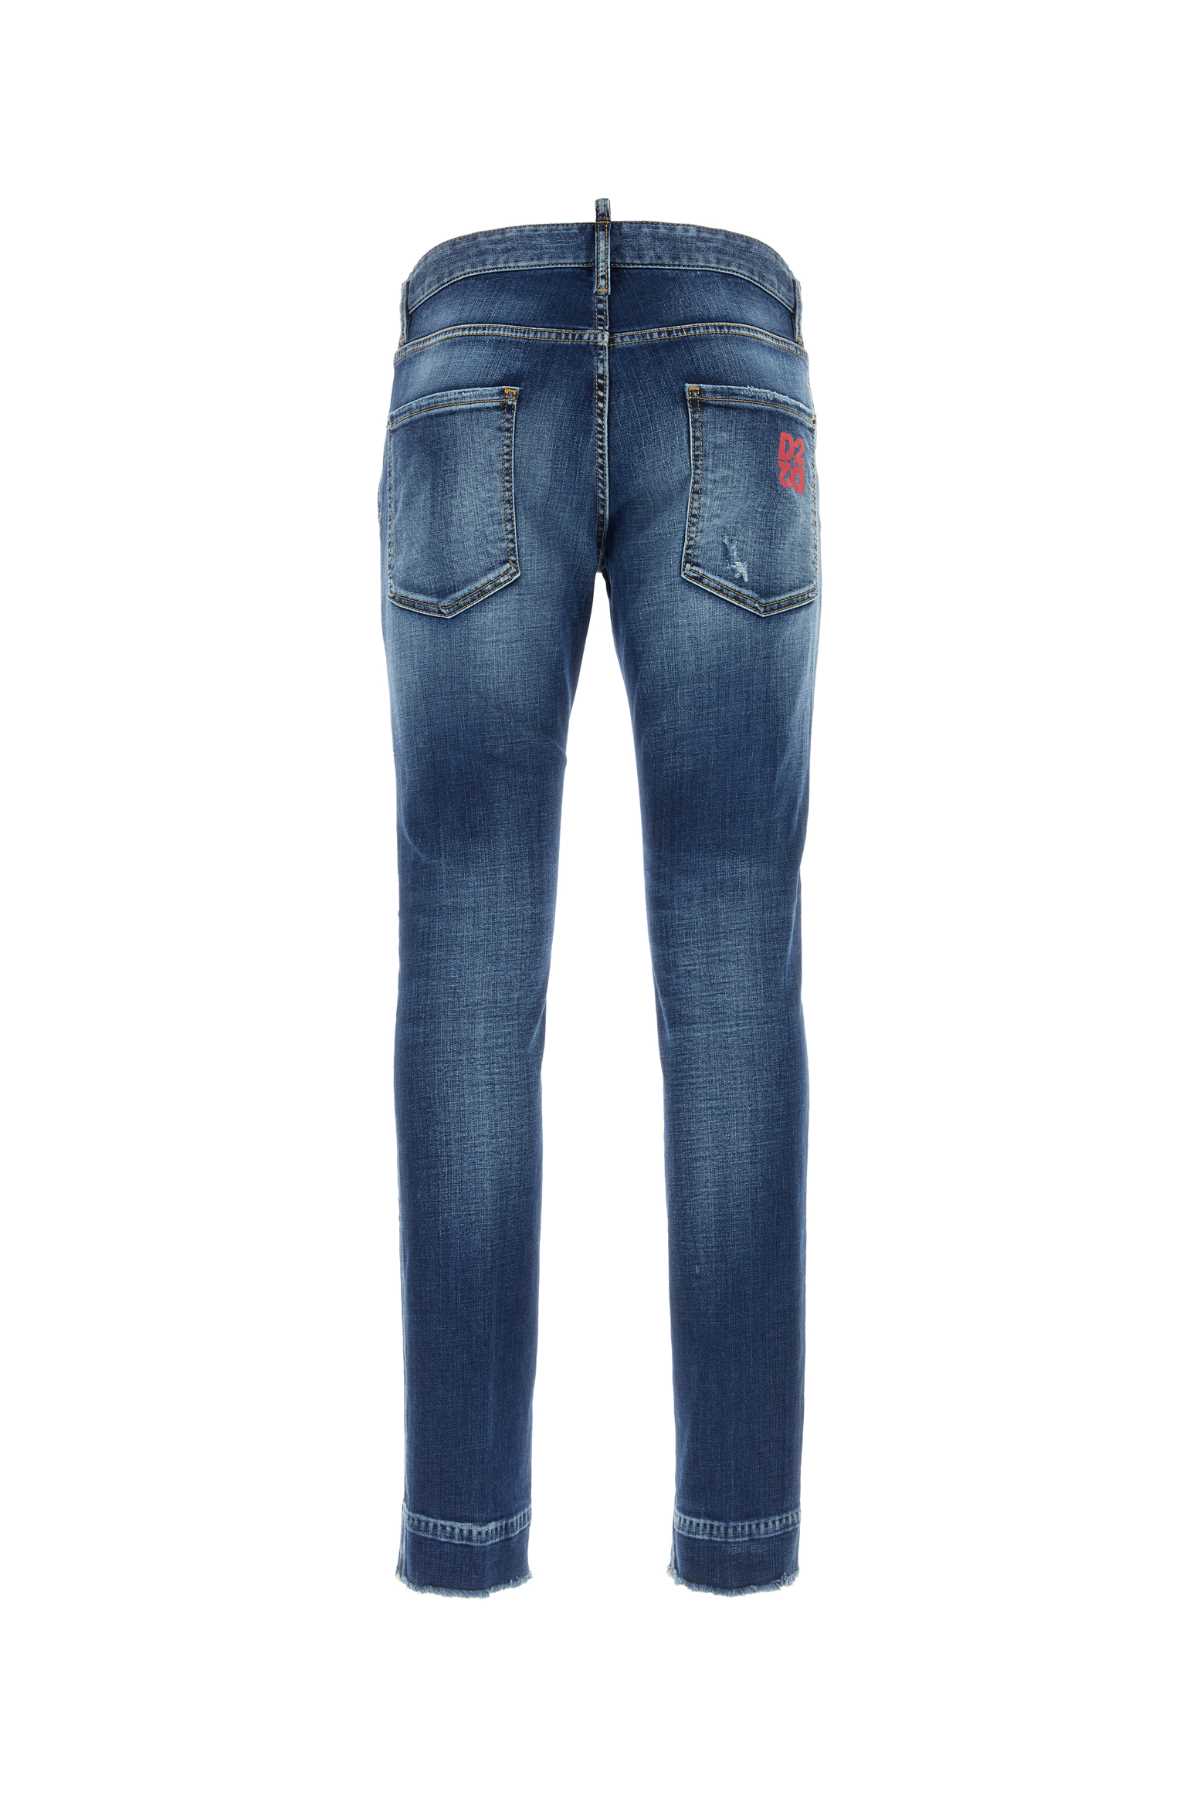 Shop Dsquared2 Stretch Denim Cool Guy Jeans In Navyblue